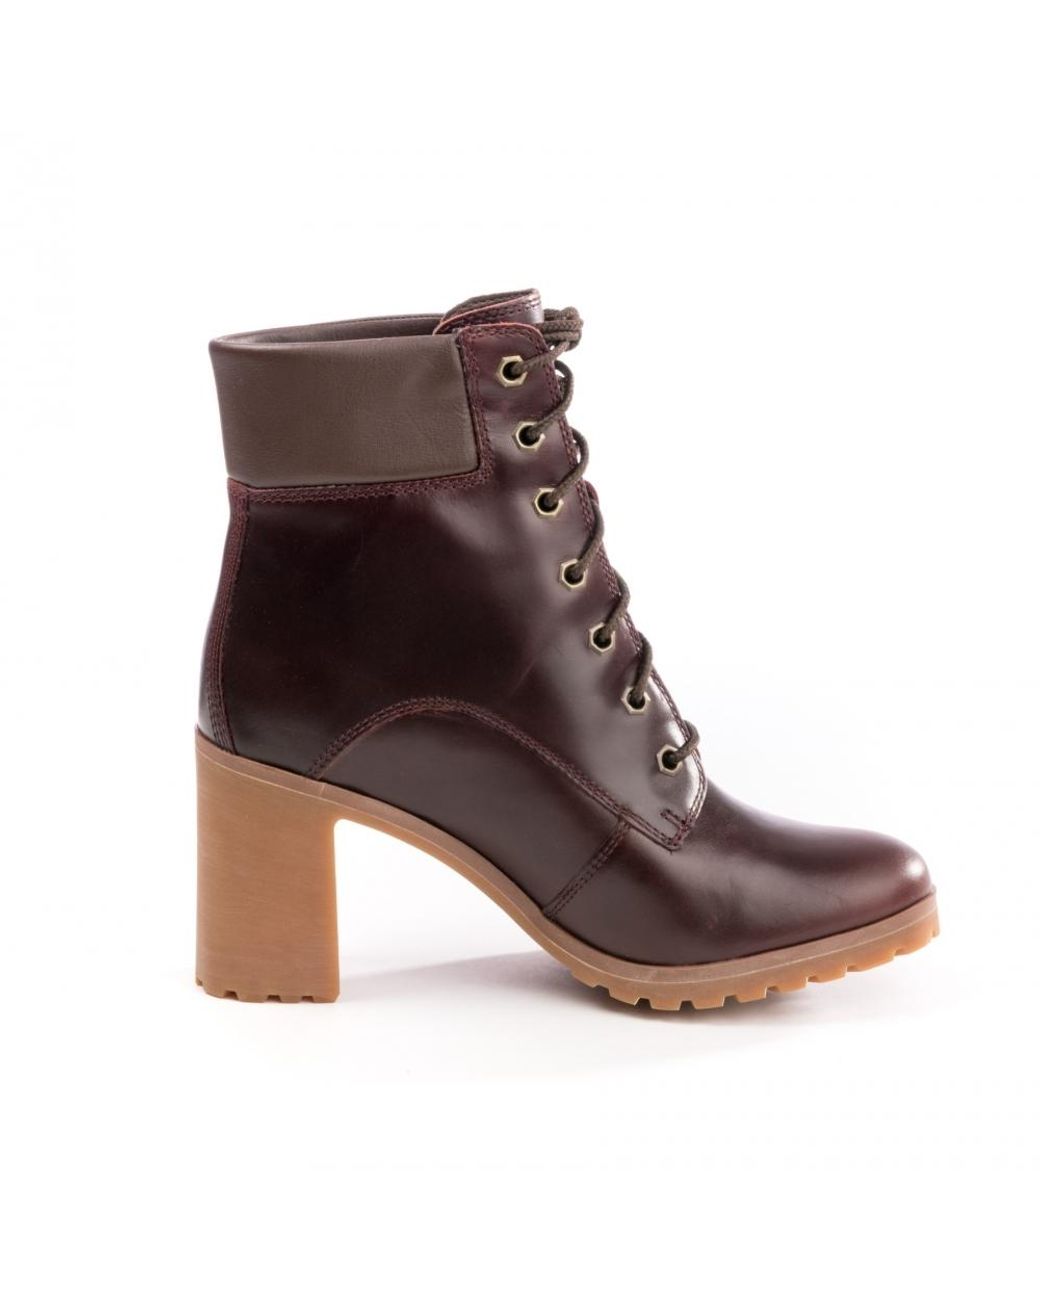 Timberland Allington 6 Inch Lace Up Boots in Brown | Lyst Australia